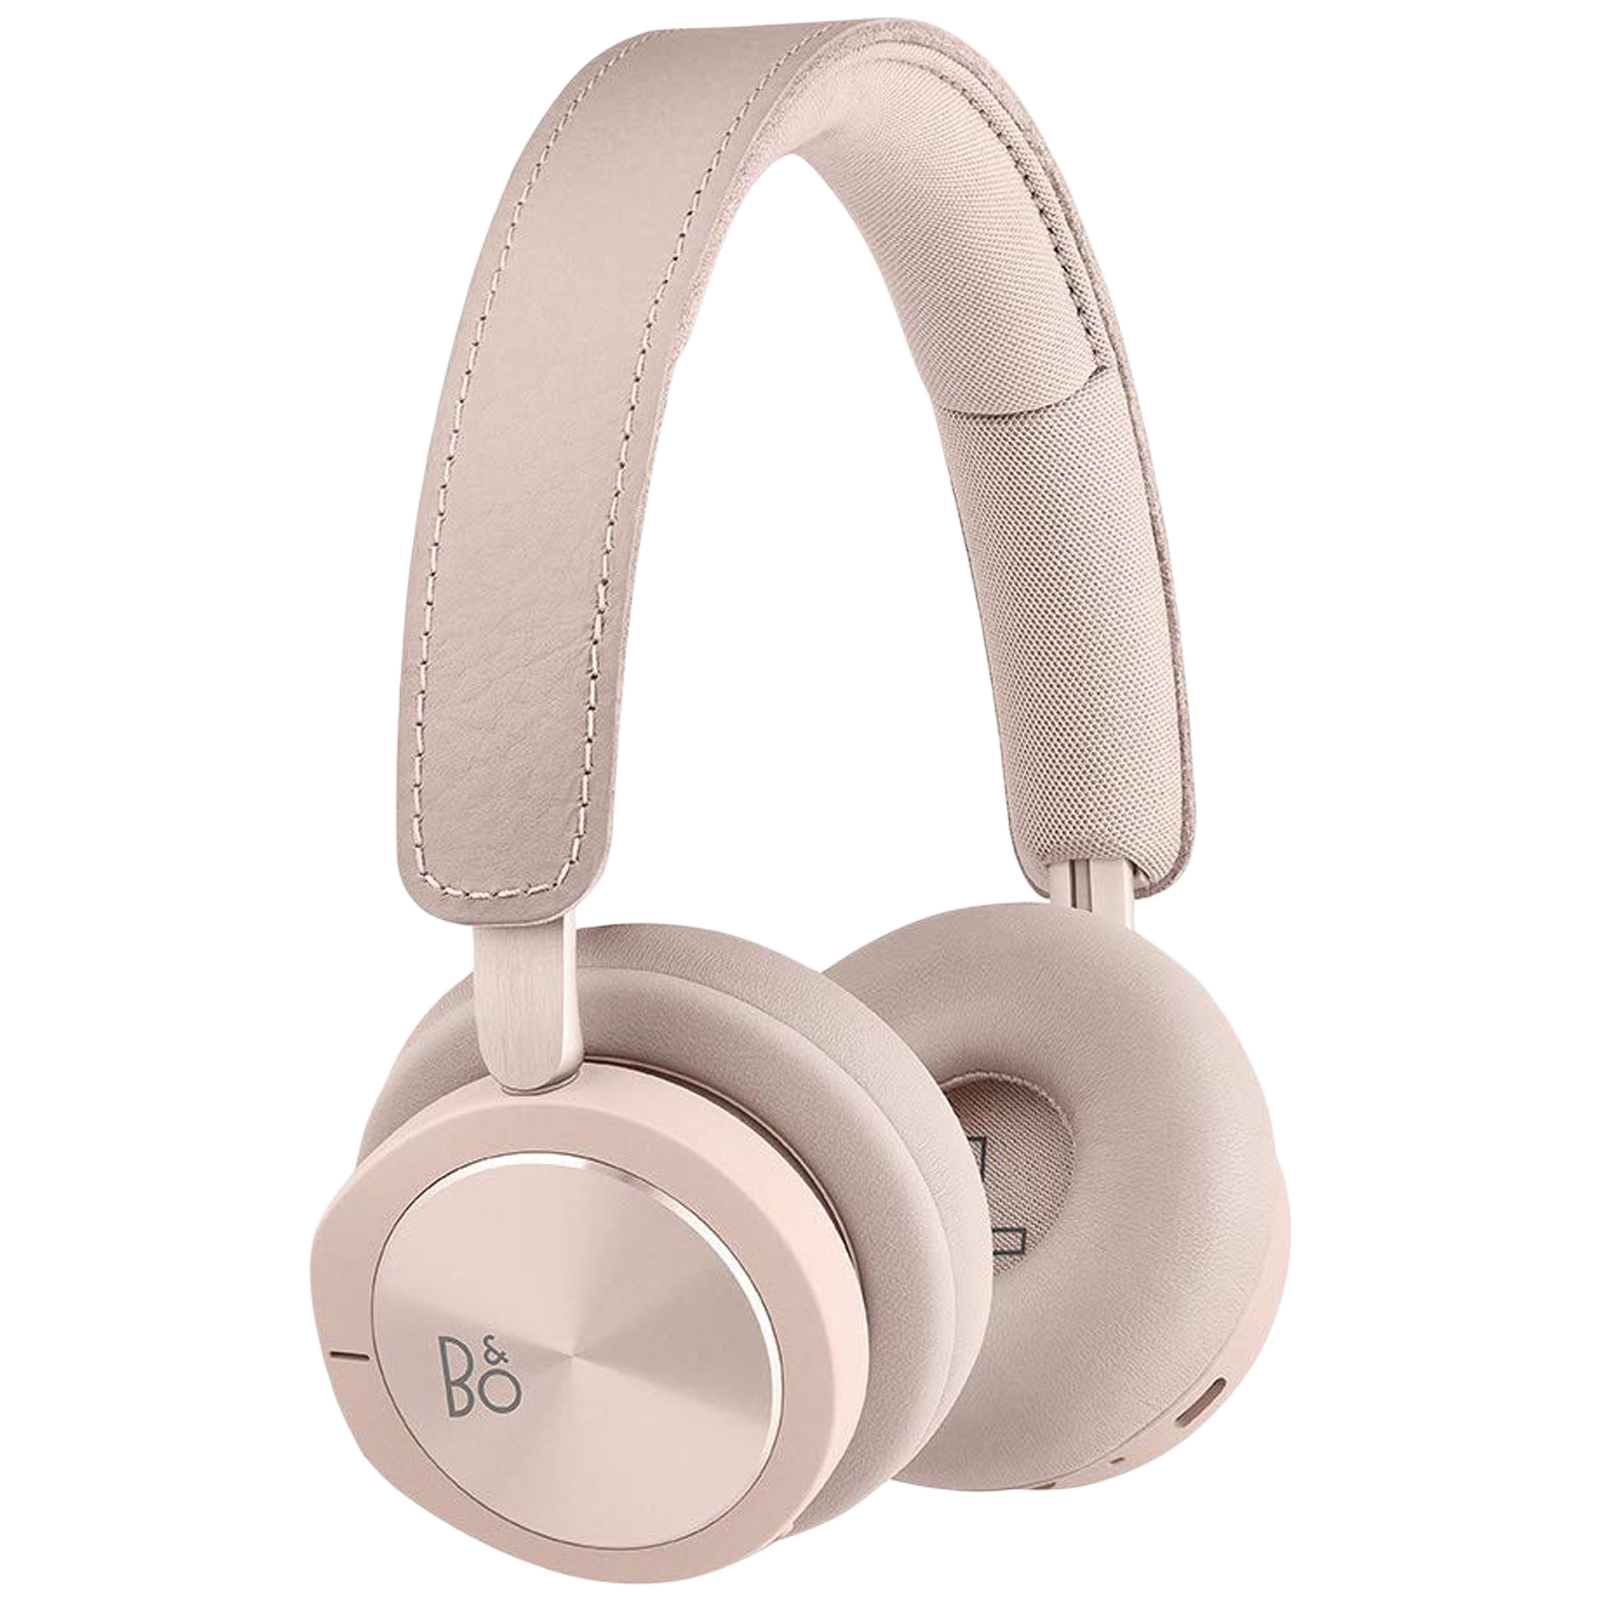 Bang & Olufsen Beoplay H8i BO-BPH8i-PNK On-Ear Active Noise Cancellation Wireless Headphone with Mic (Bluetooth 4.2, Built-in Proximity Sensor, Pink)_1